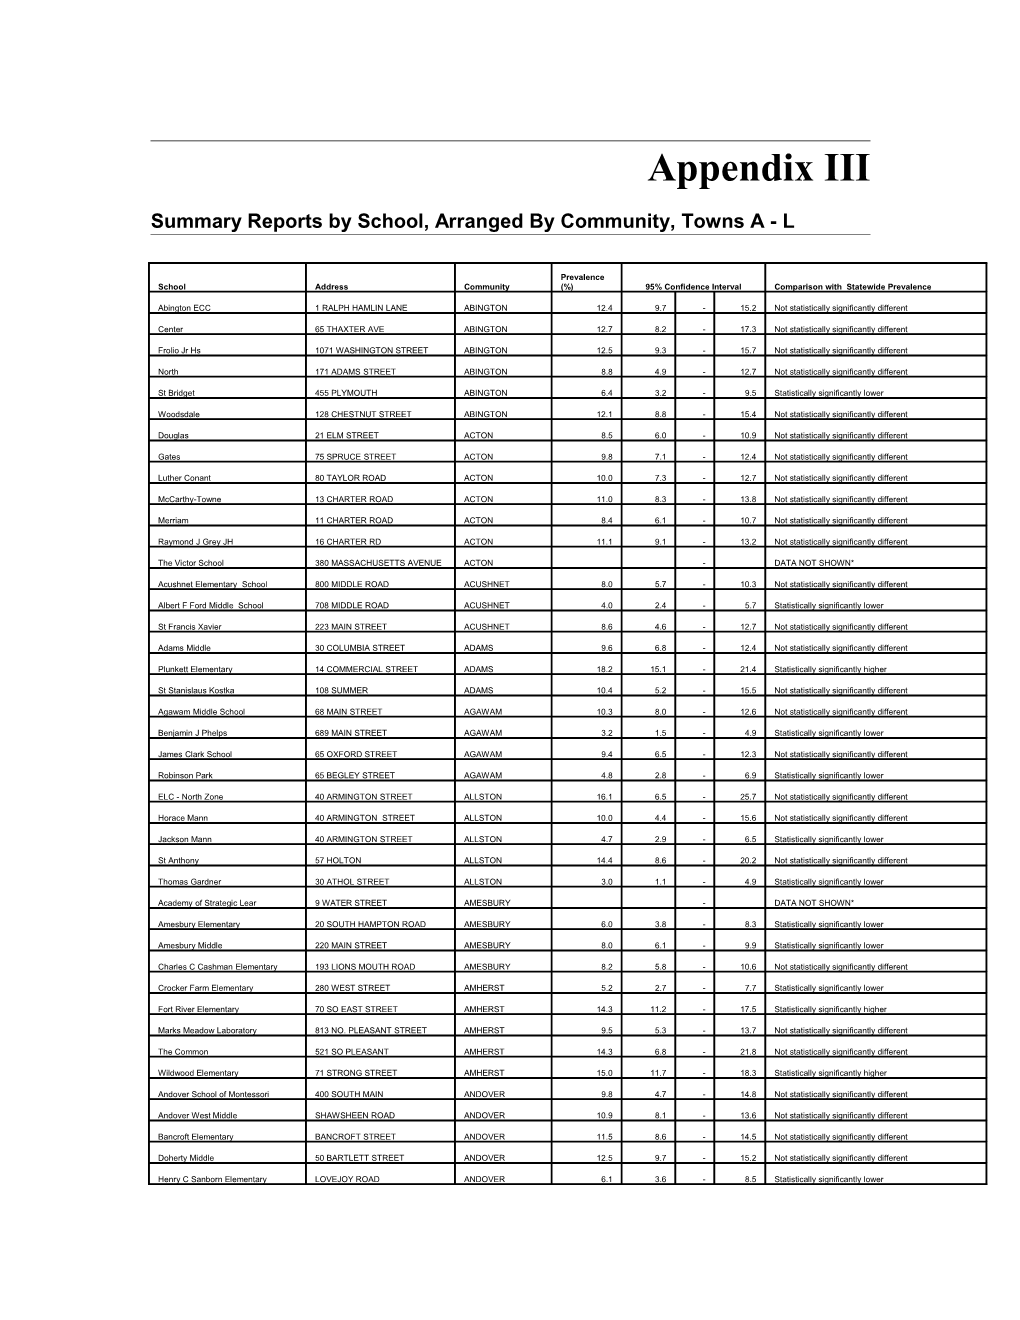 Summary Reports by School, Arranged by Community, Towns a - L